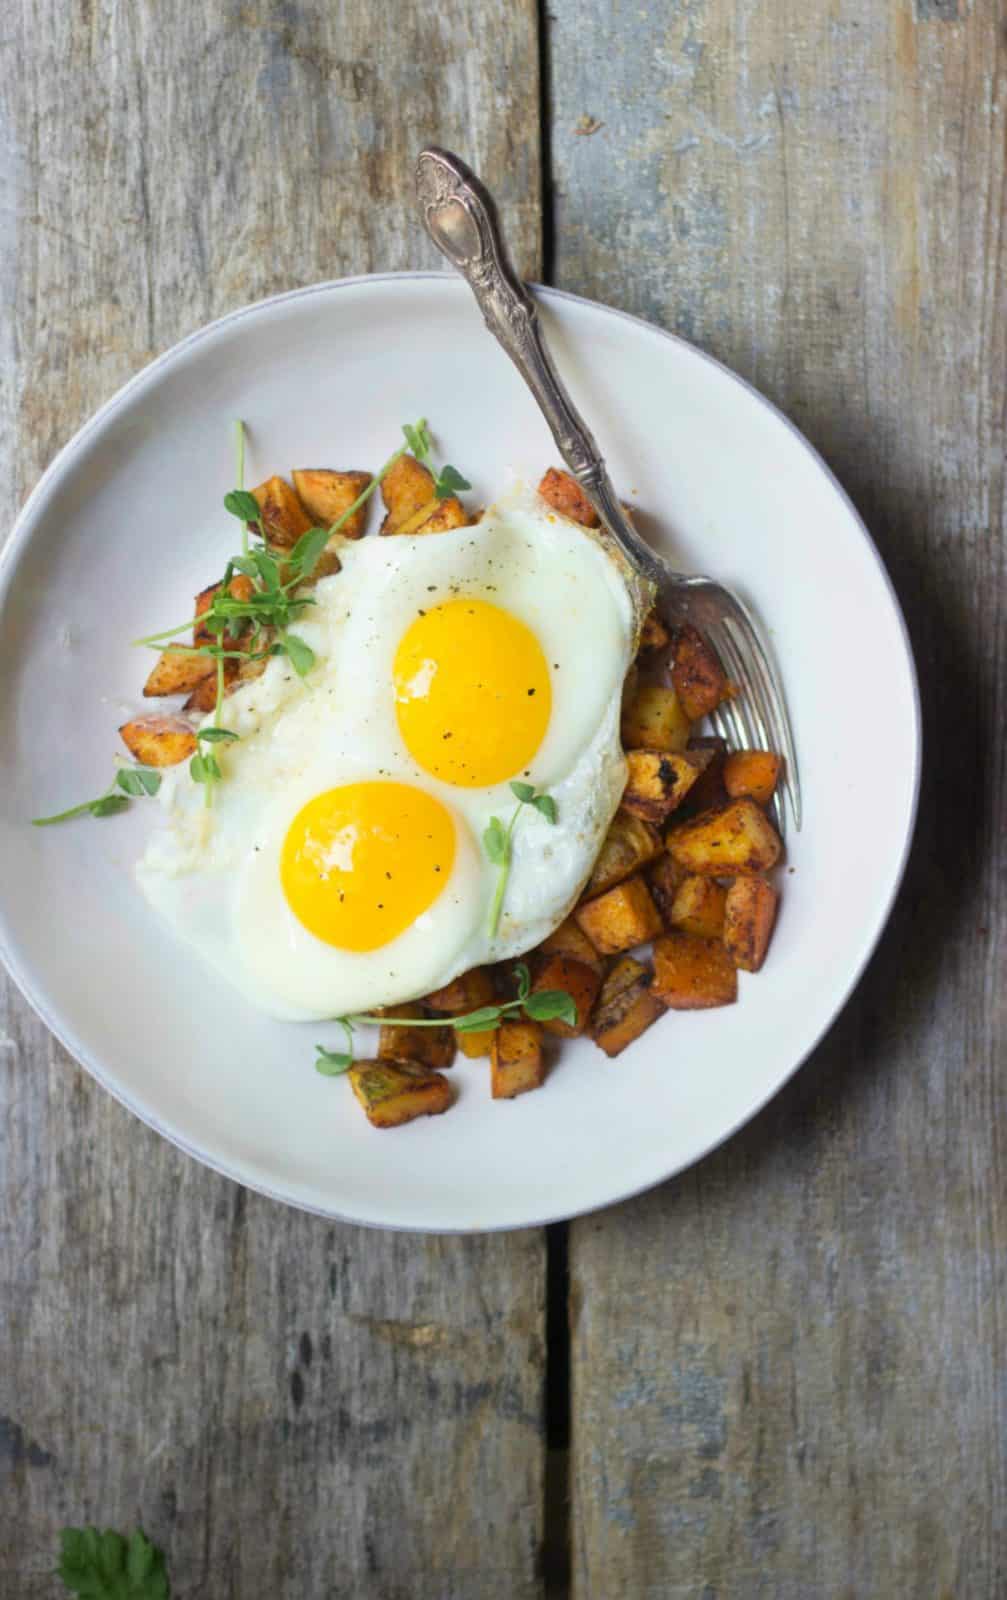 Crispy breakfast potatoes with fried eggs in a white bowl